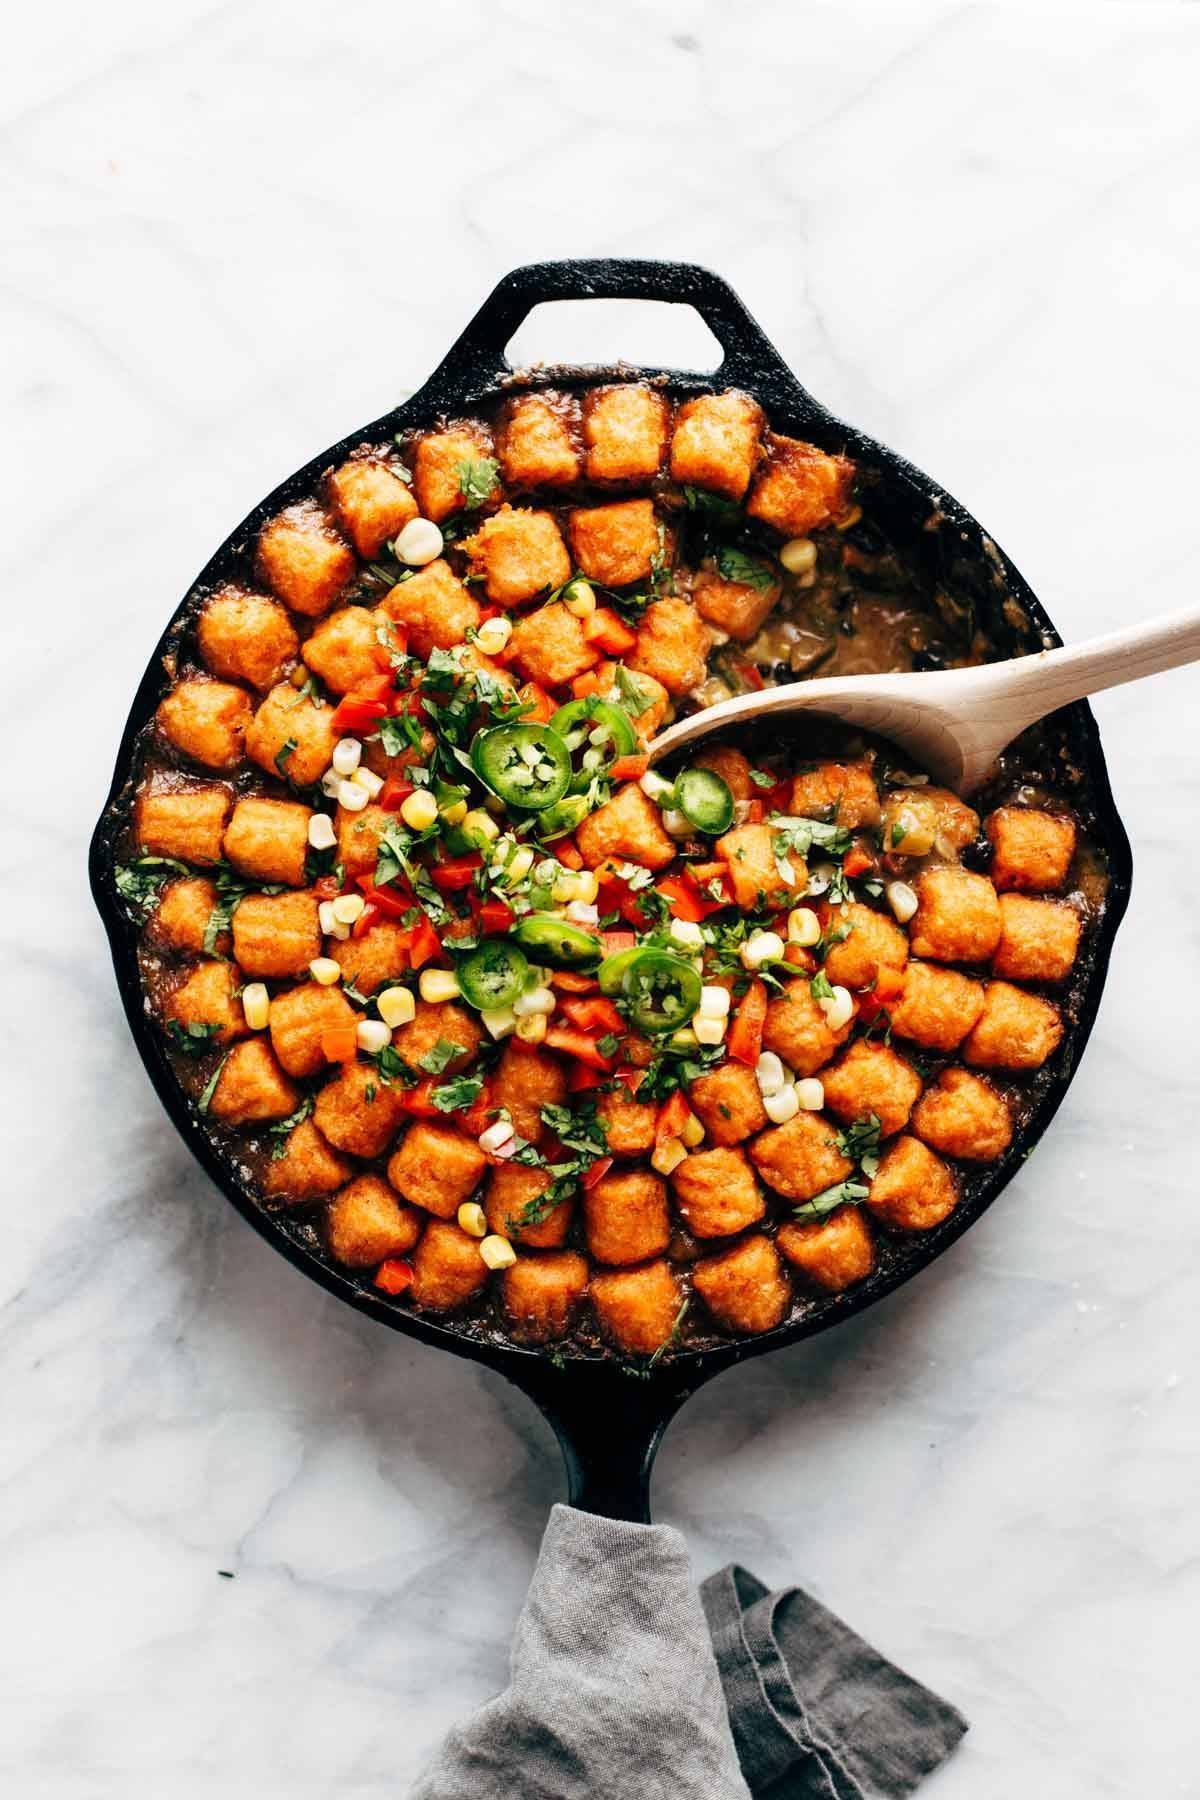 Tater tot hot dish in a cast iron skillet.